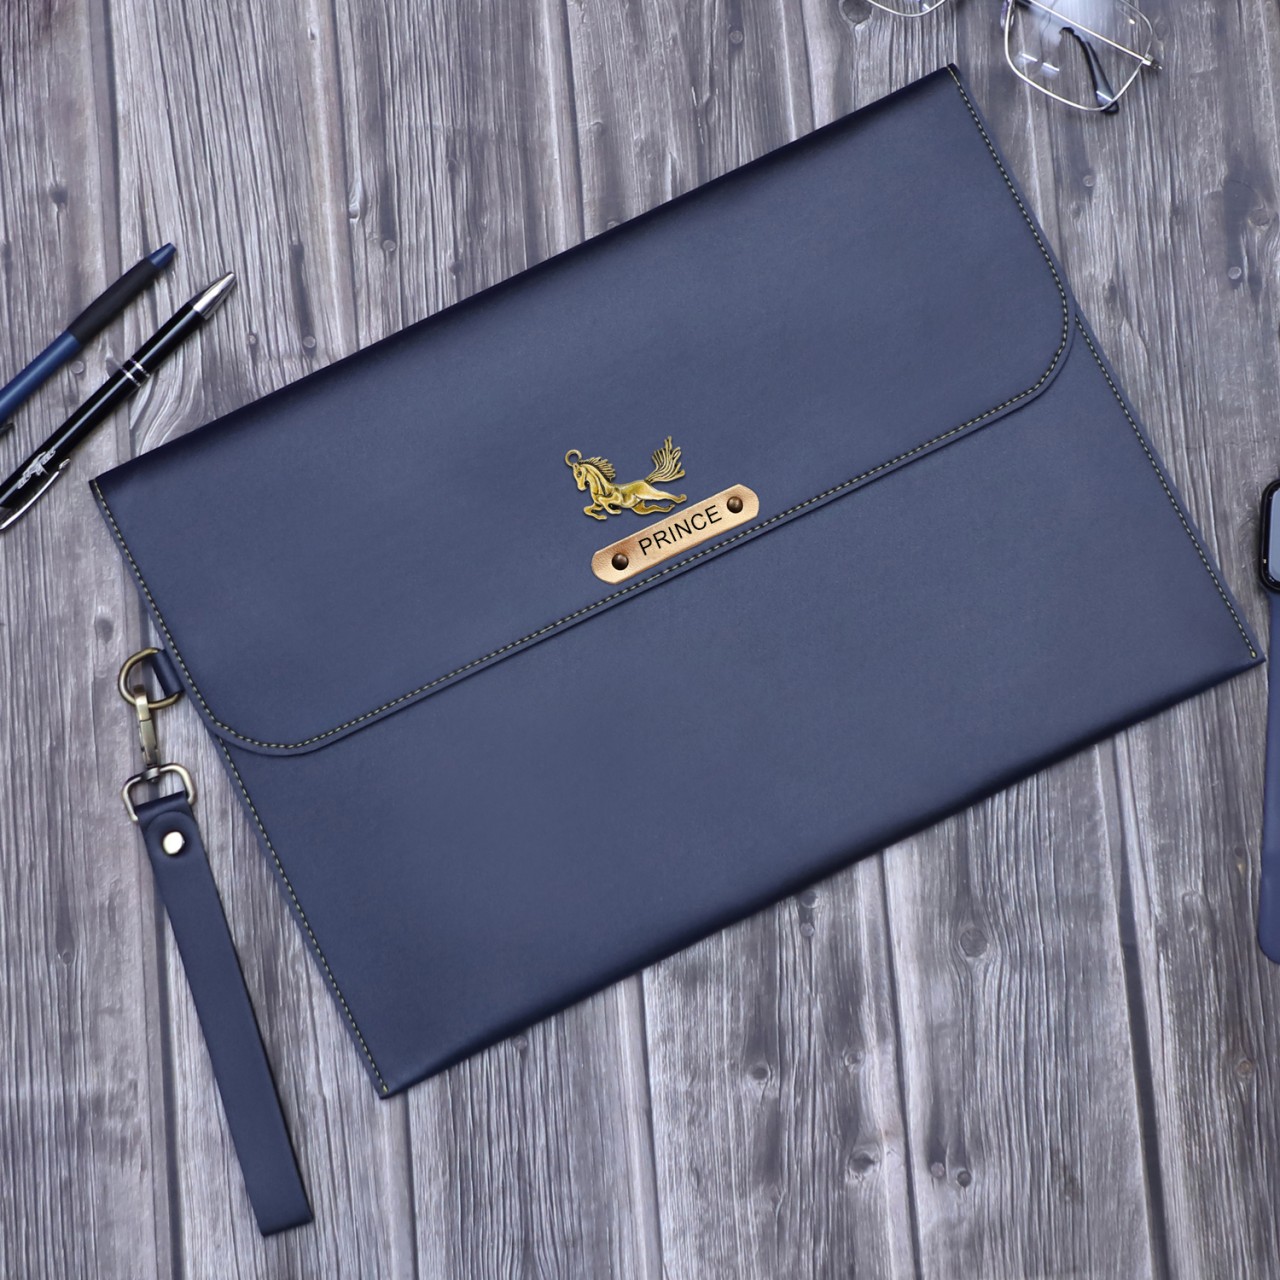 Personalized Laptop Sleeve With Name & Charm